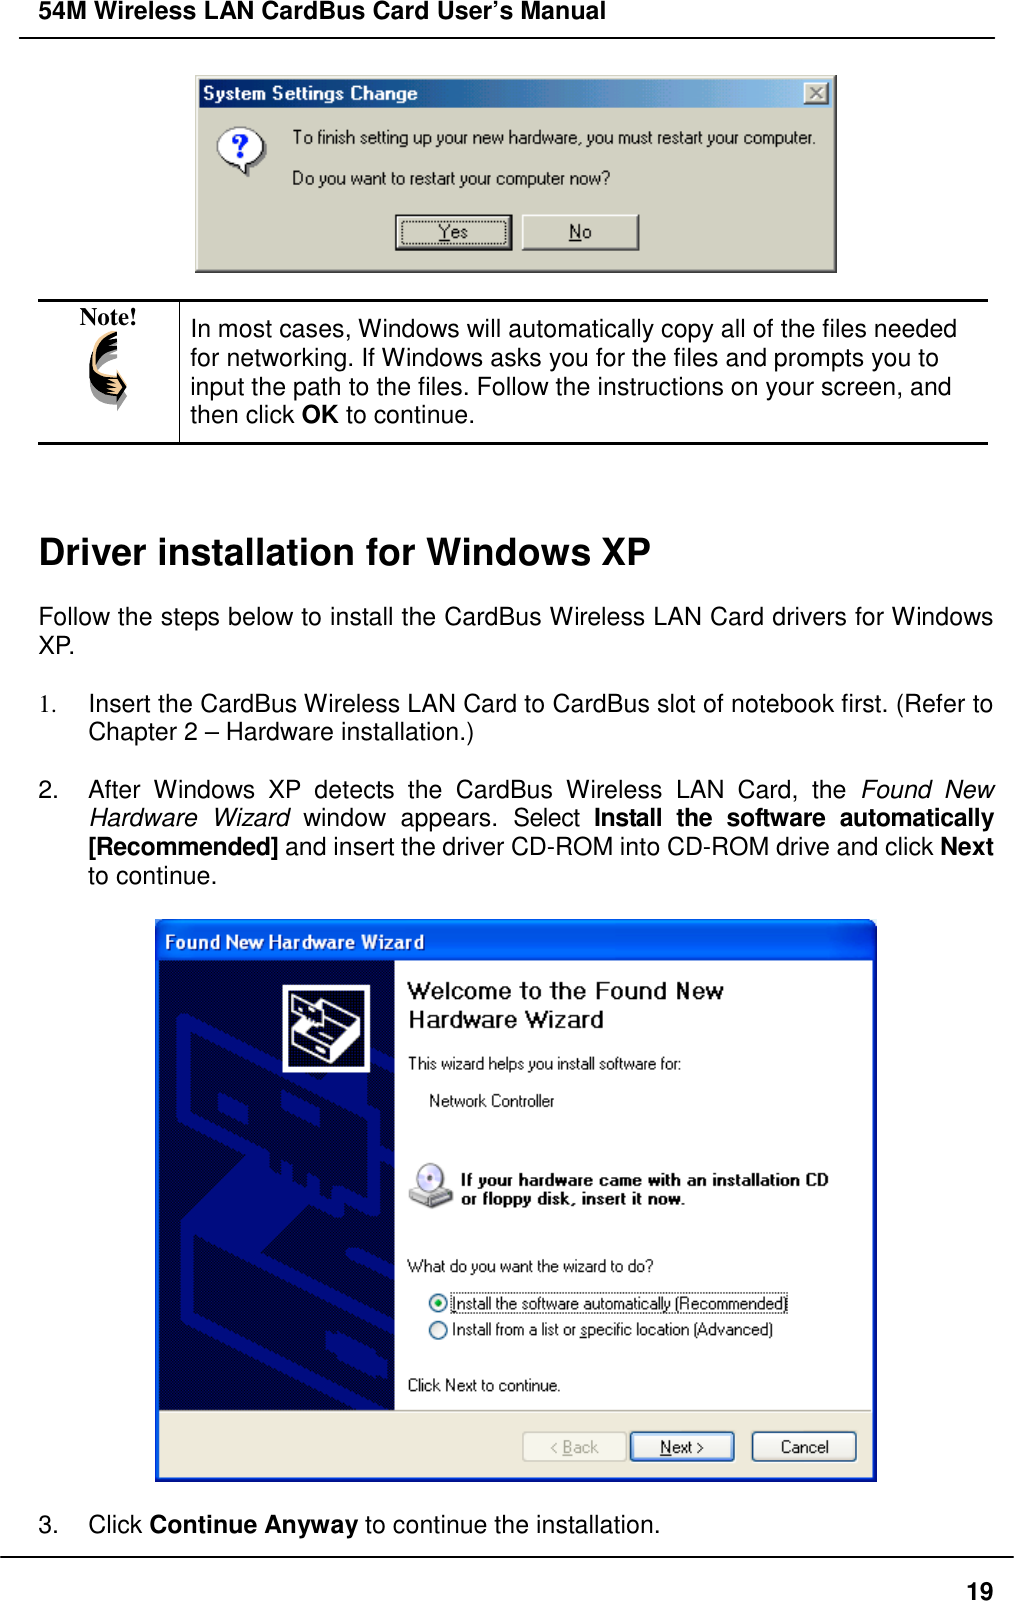 54M Wireless LAN CardBus Card User’s Manual19Note! In most cases, Windows will automatically copy all of the files neededfor networking. If Windows asks you for the files and prompts you toinput the path to the files. Follow the instructions on your screen, andthen click OK to continue.Driver installation for Windows XPFollow the steps below to install the CardBus Wireless LAN Card drivers for WindowsXP.1.  Insert the CardBus Wireless LAN Card to CardBus slot of notebook first. (Refer toChapter 2 – Hardware installation.)2.  After Windows XP detects the CardBus Wireless LAN Card, the Found NewHardware Wizard window appears. Select Install the software automatically[Recommended] and insert the driver CD-ROM into CD-ROM drive and click Nextto continue.3. Click Continue Anyway to continue the installation.